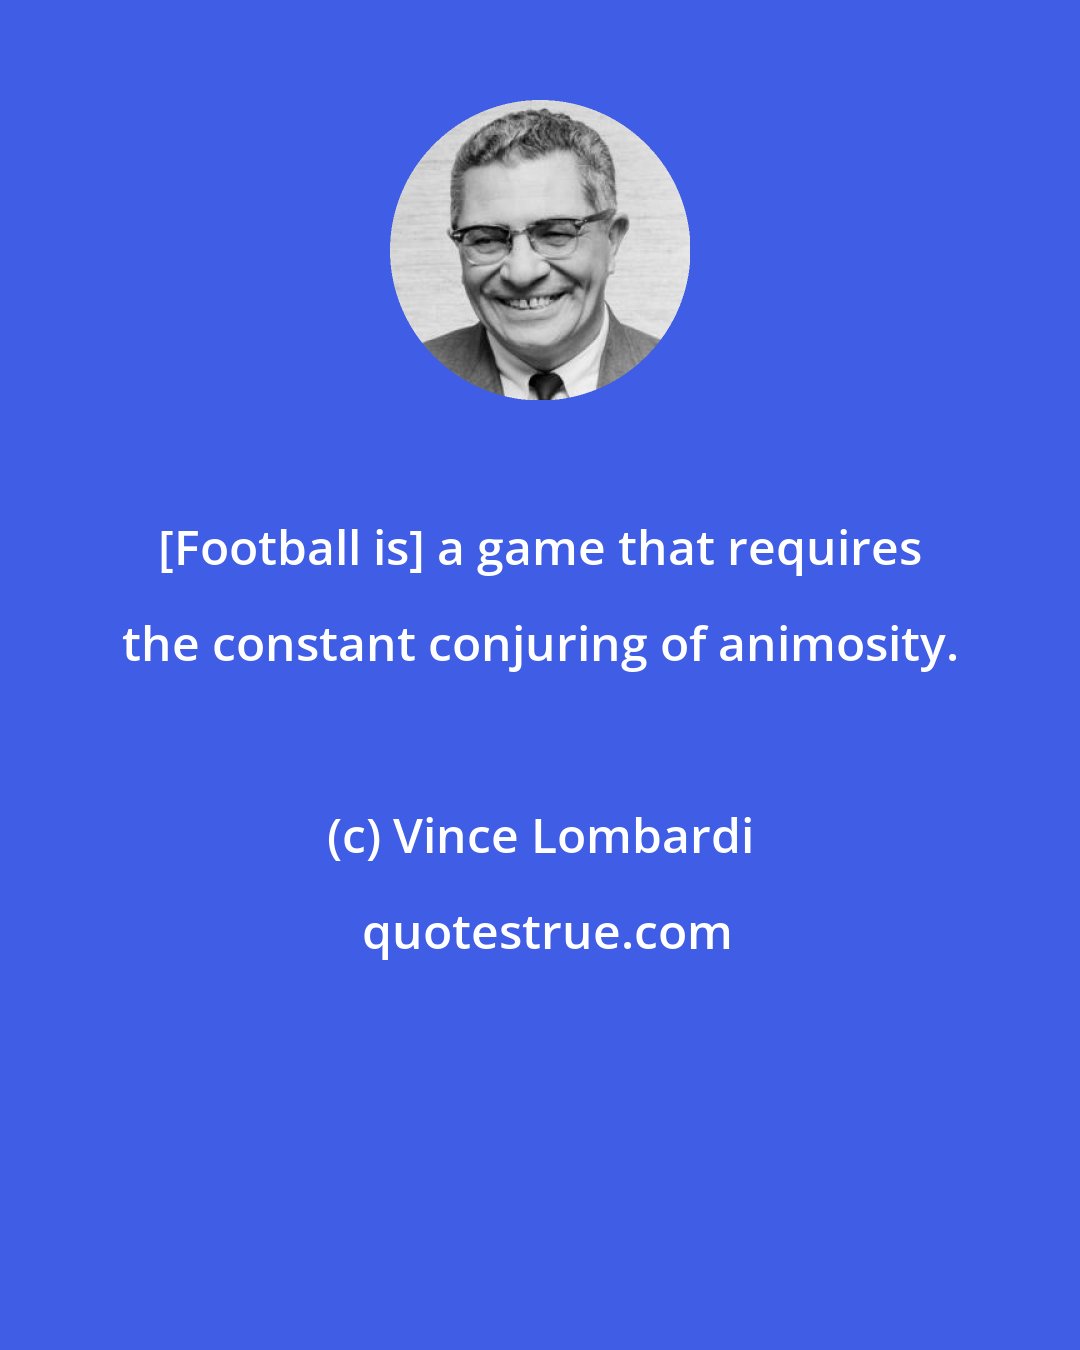 Vince Lombardi: [Football is] a game that requires the constant conjuring of animosity.